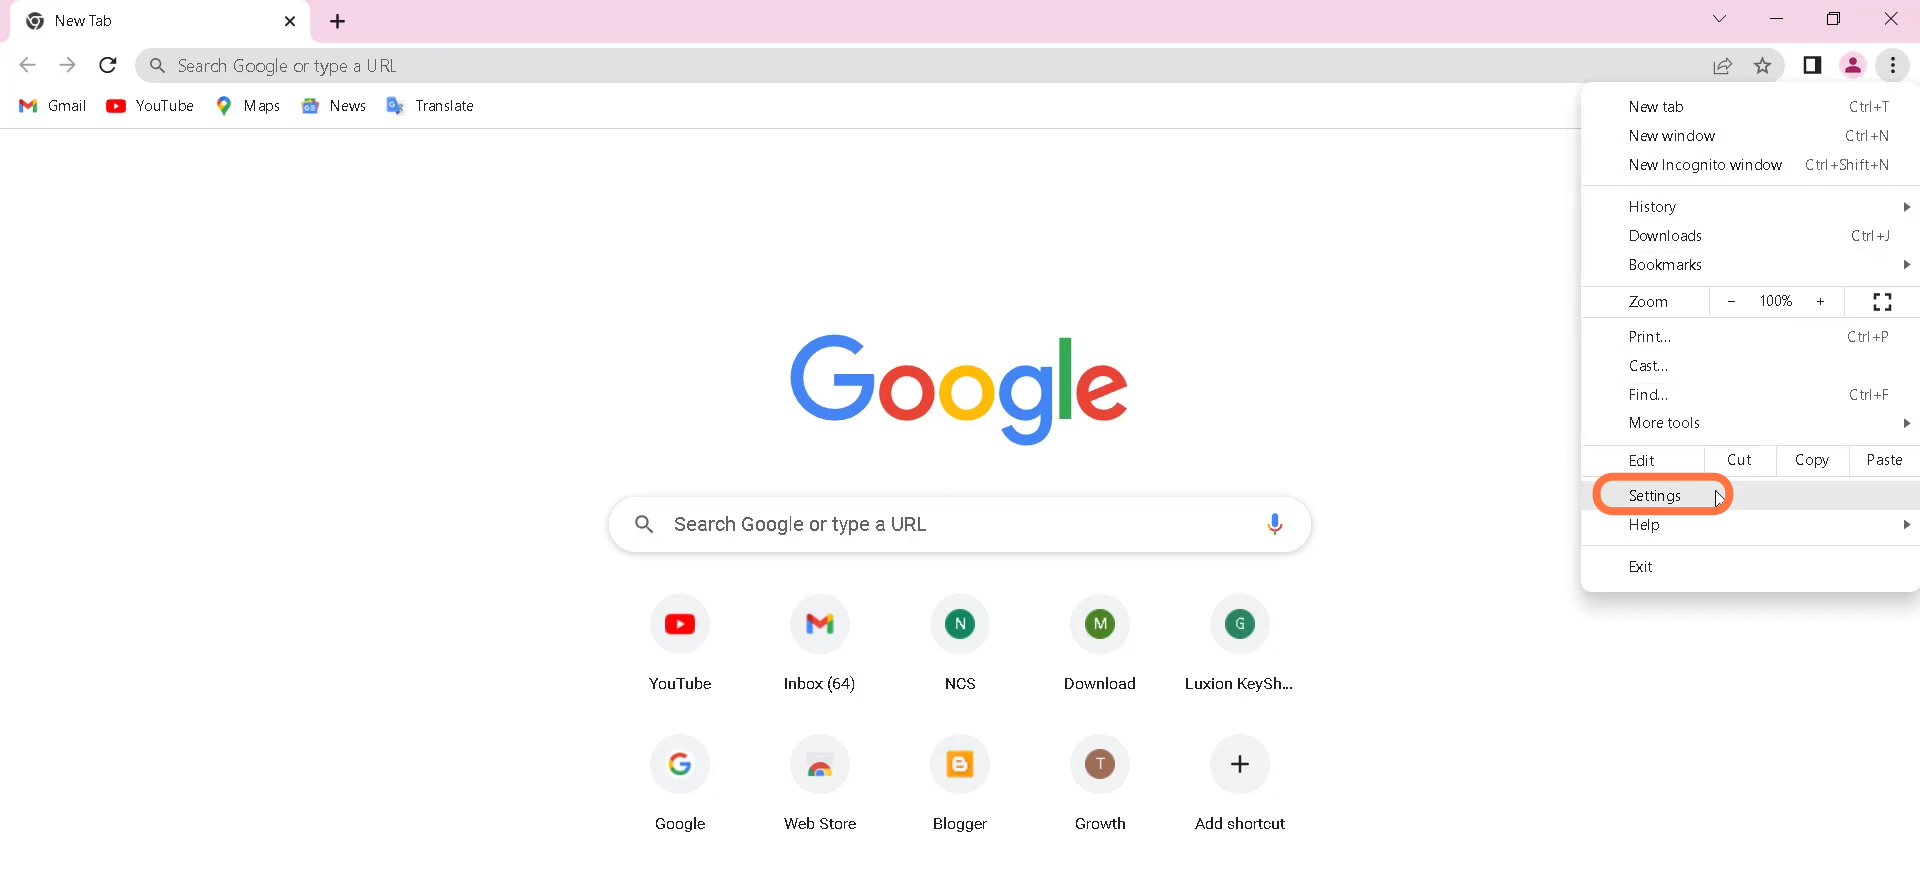 First, you will need to open Google Chrome and Enter into Settings by clicking on the dotted vertical bar at the top right of the browser screen. 